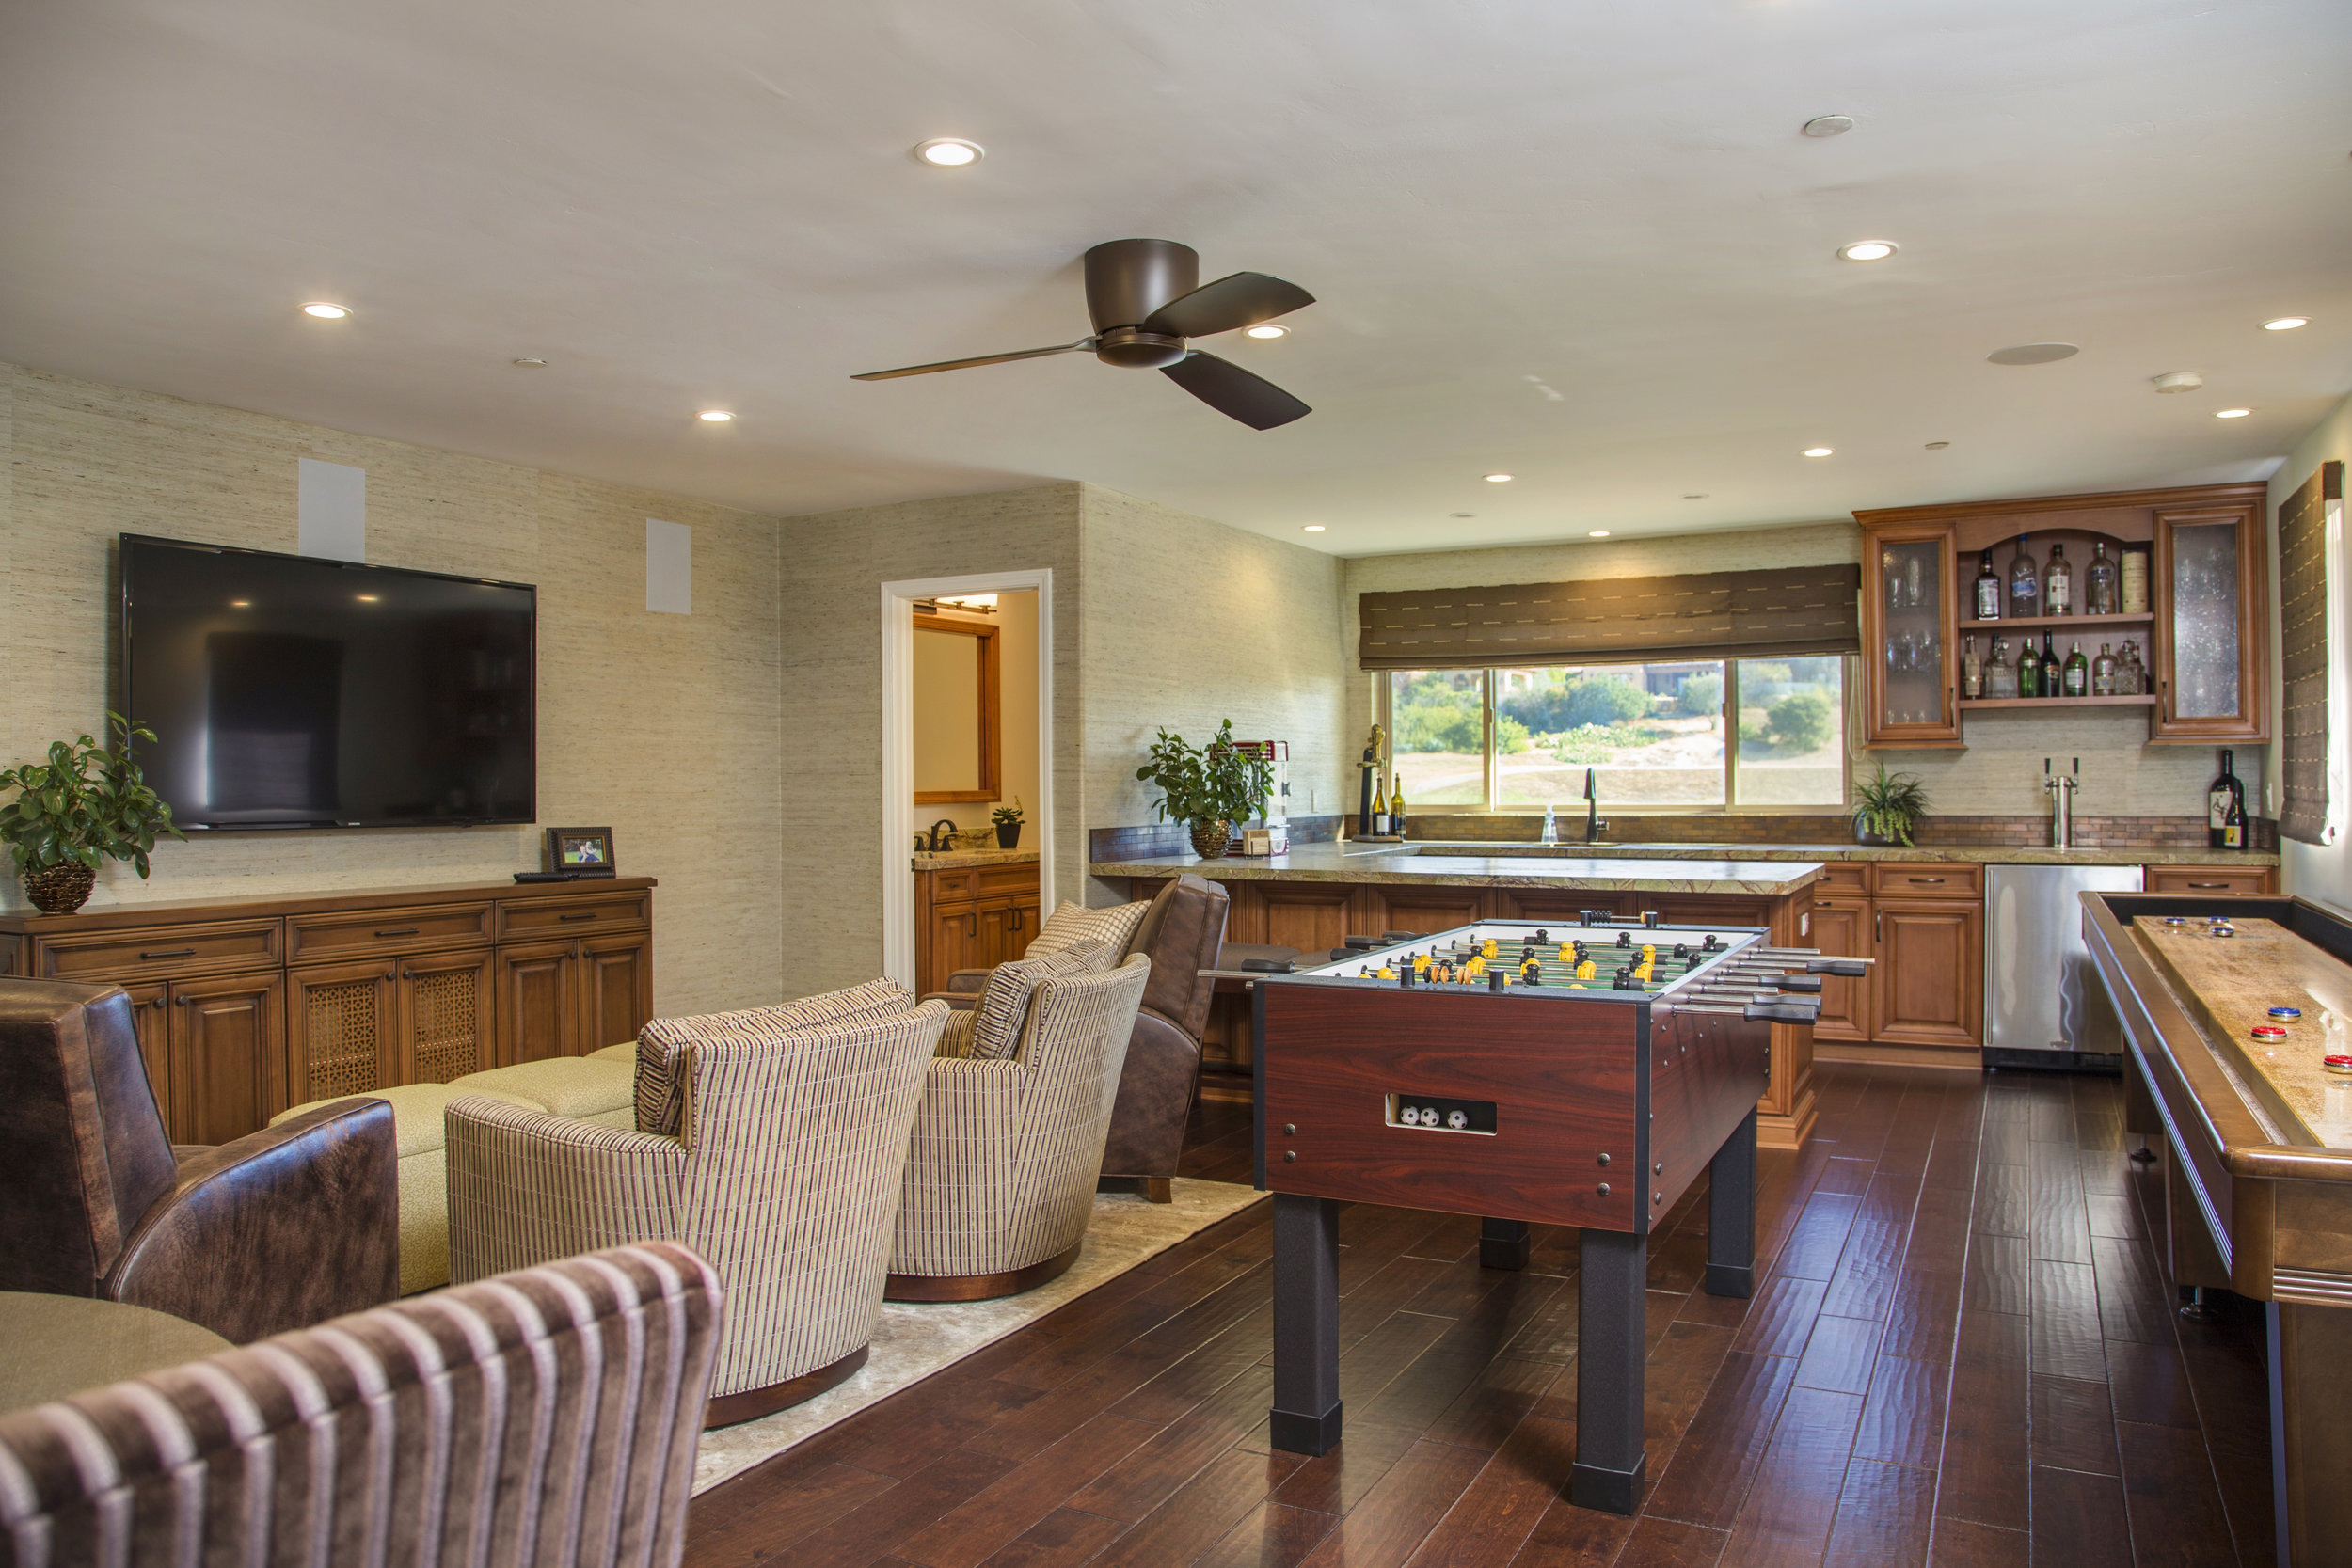 Game Room Ideas the Entire Family Will Love